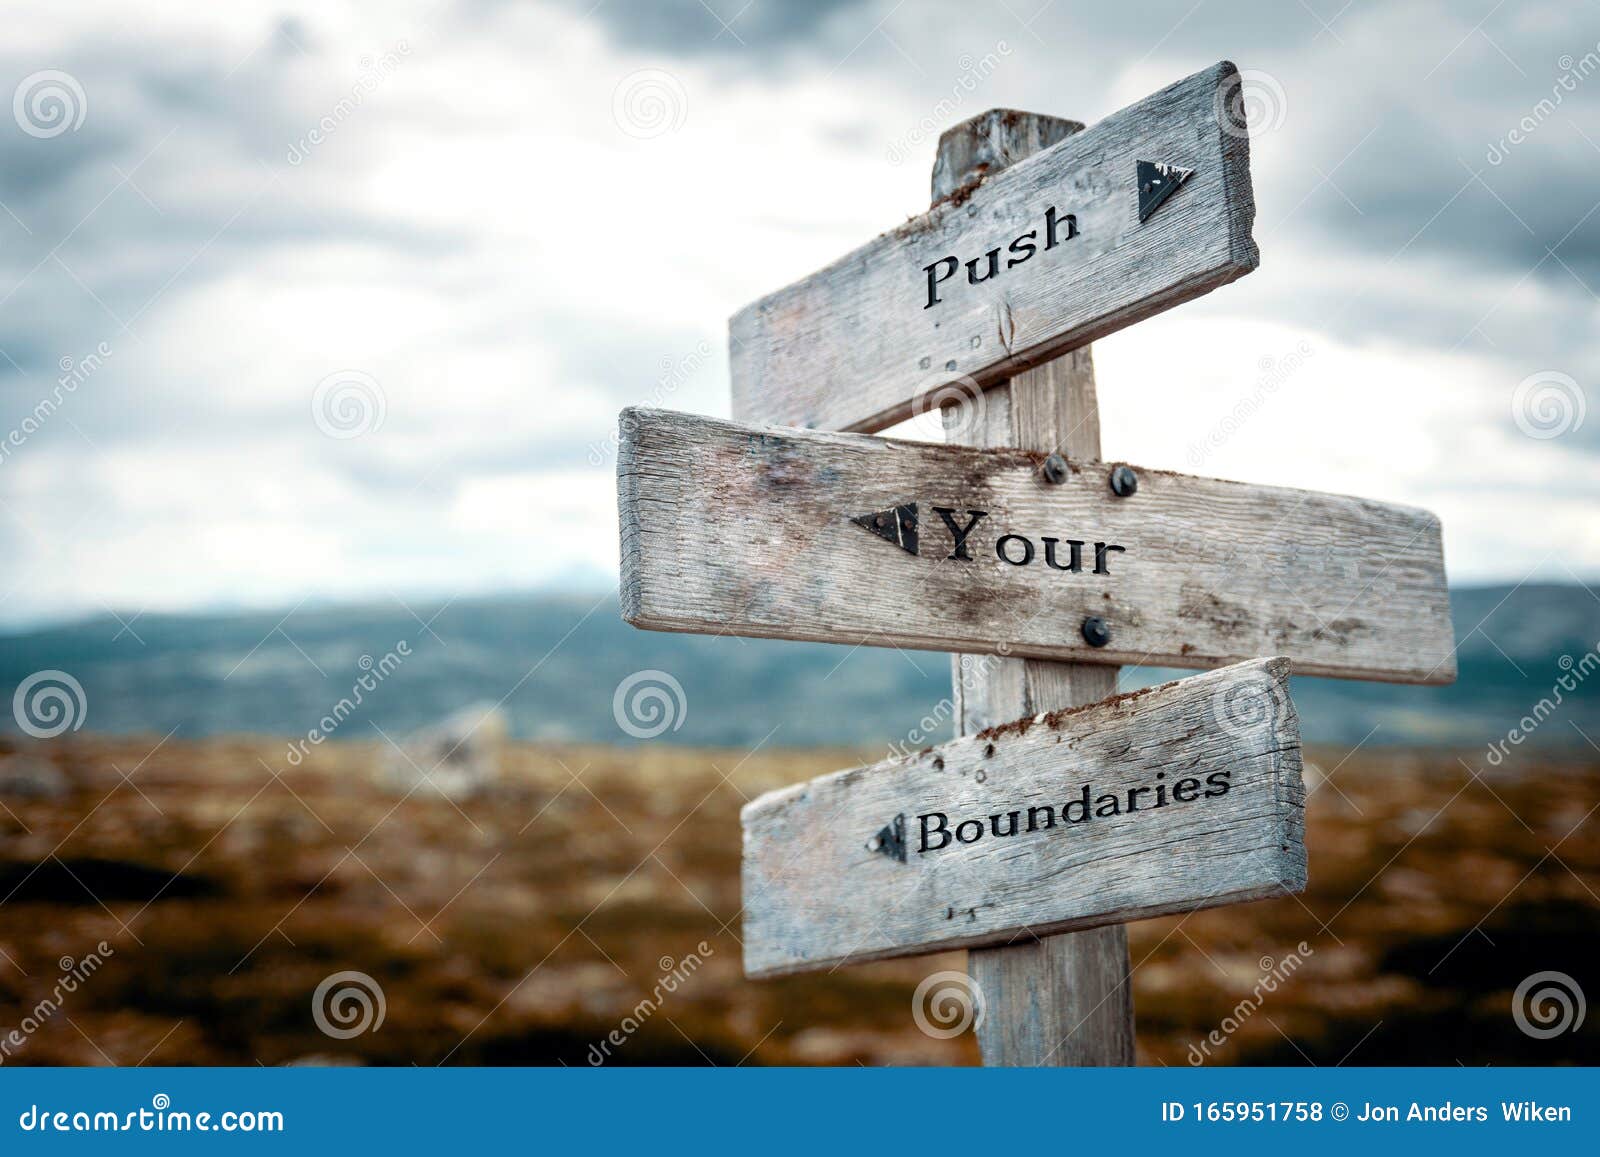 push your boundaries text on wooden rustic signpost outdoors in nature/mountain scenery.